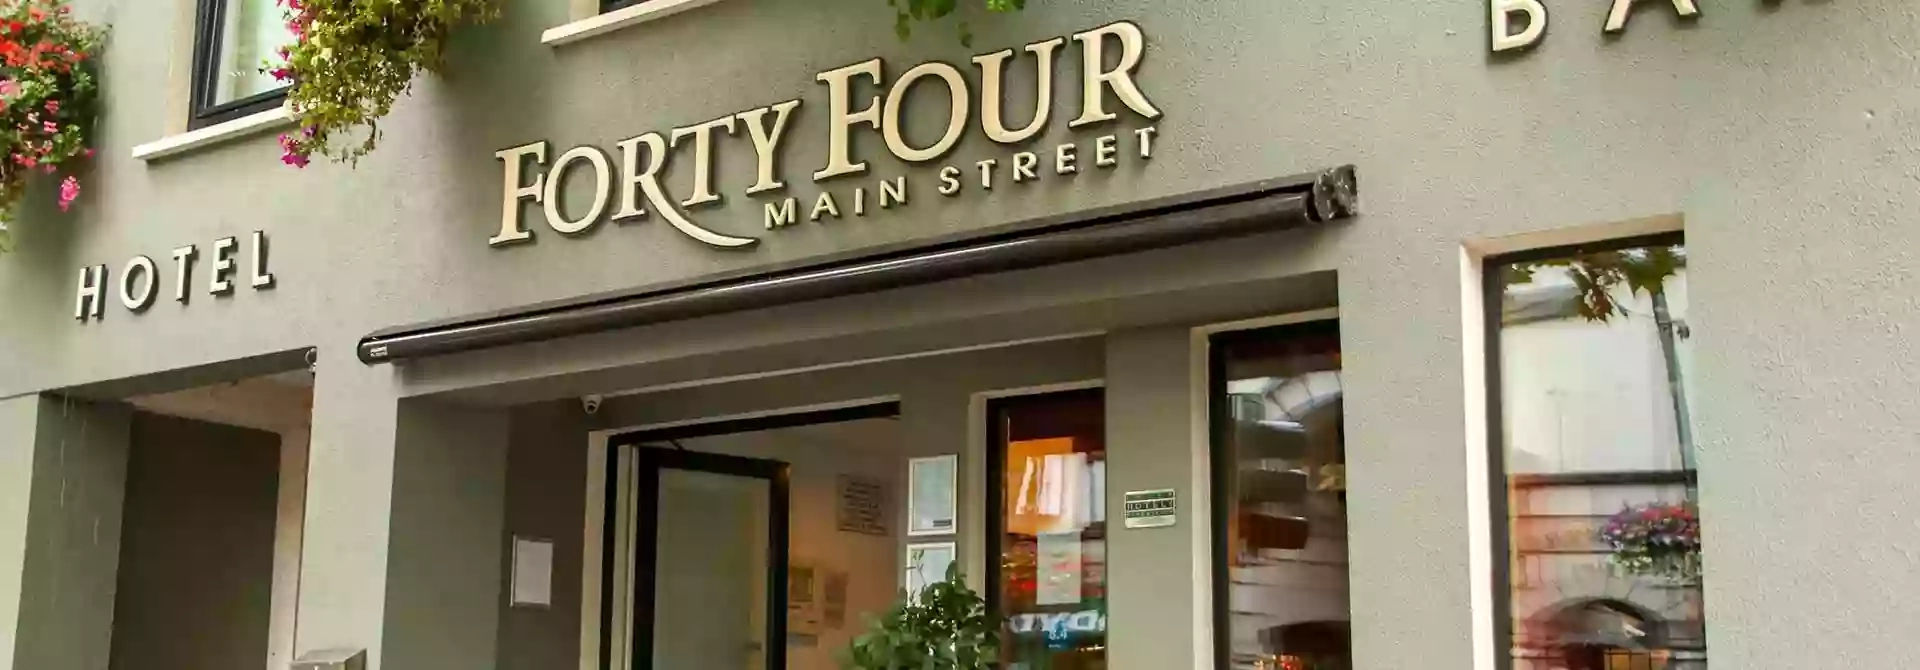 The Forty Four Hotel